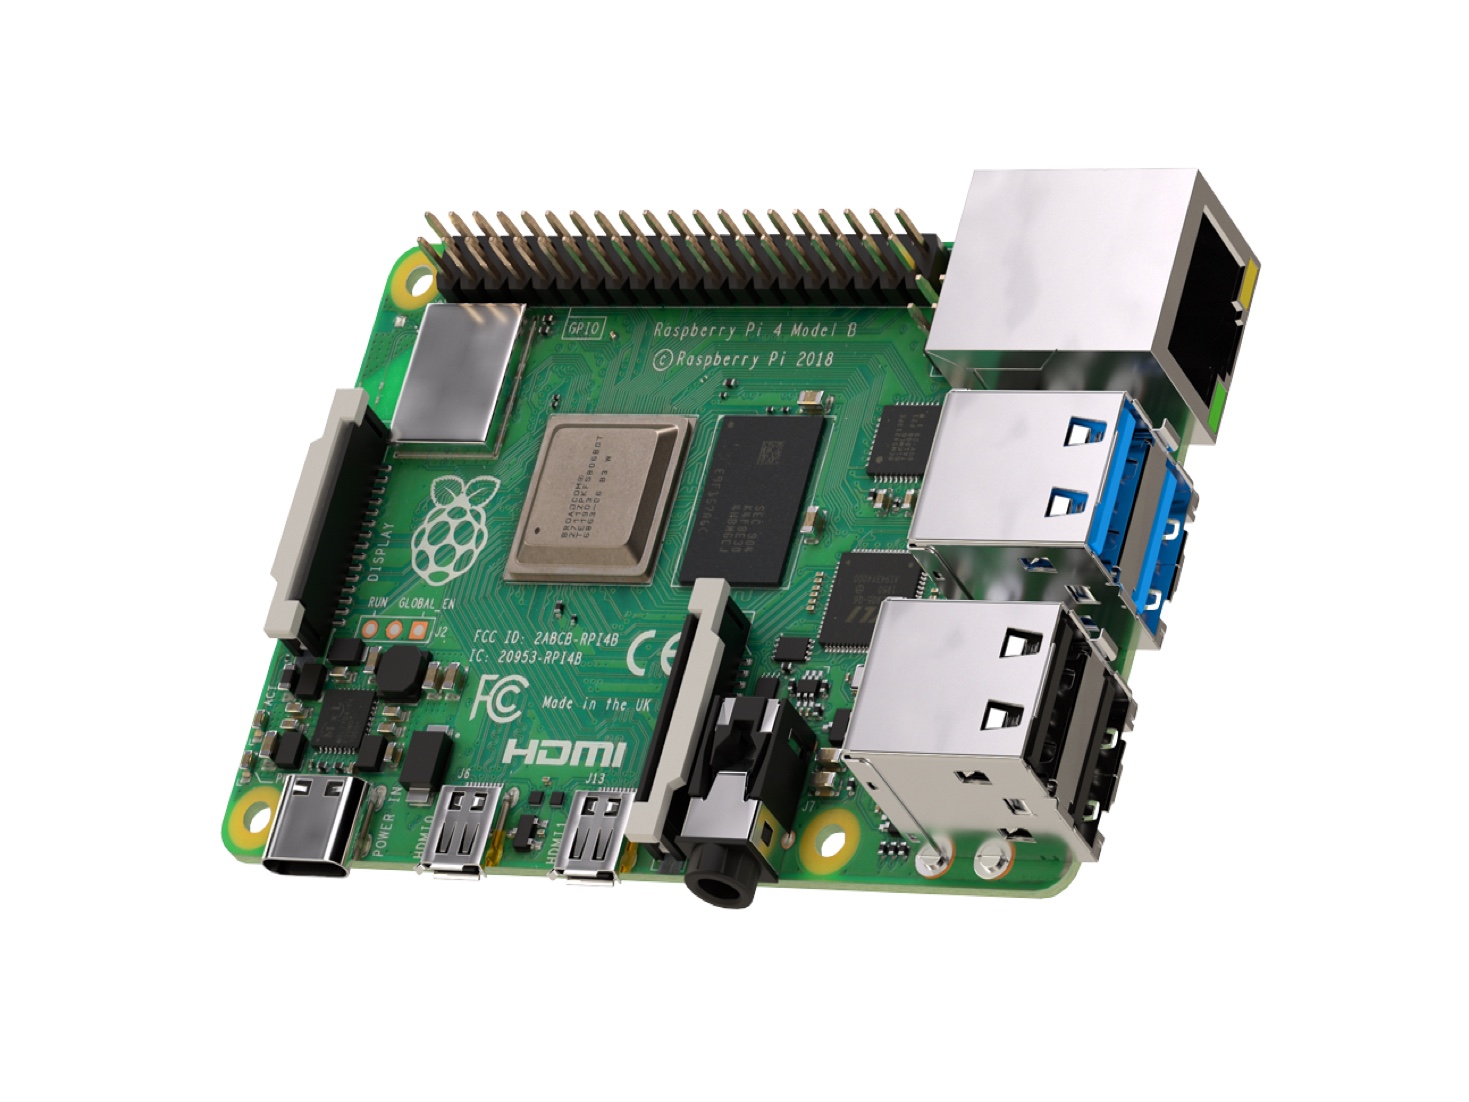 What is a Raspberry Pi?